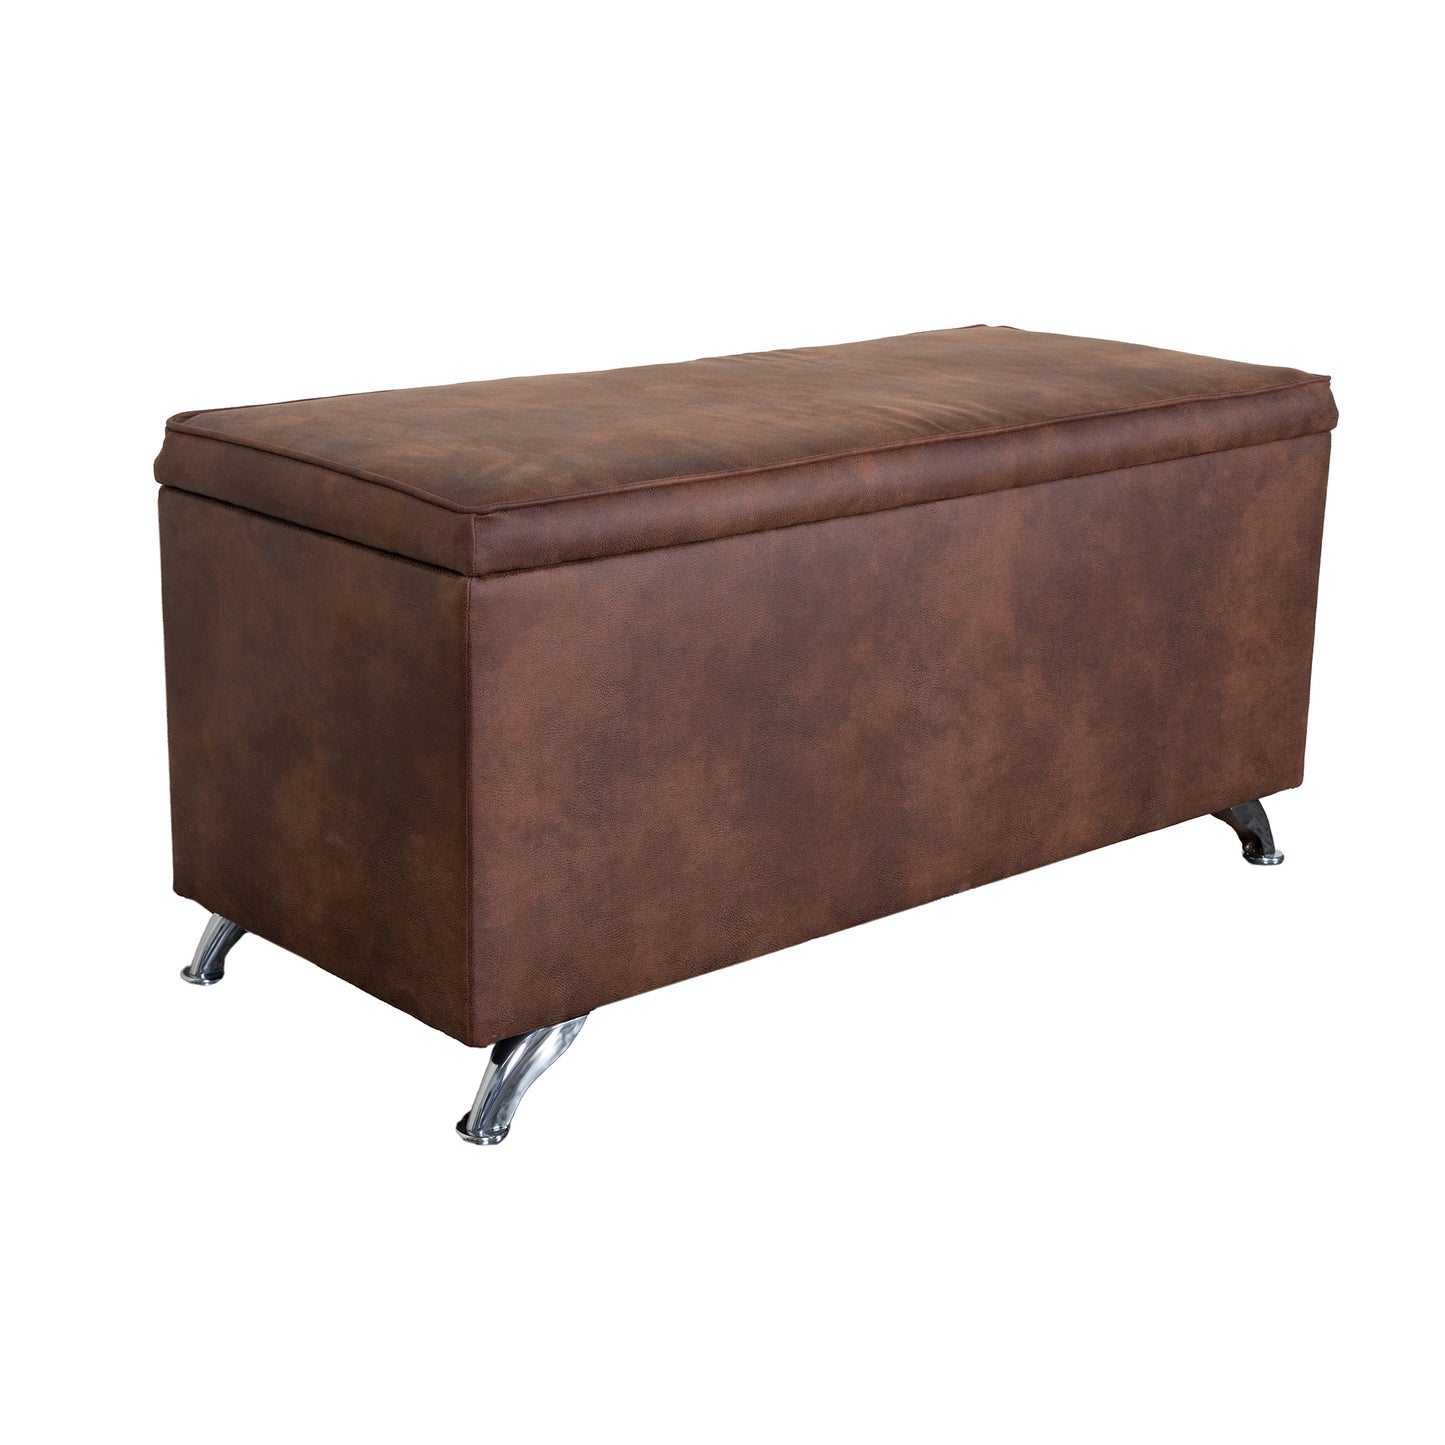 Ottoman/Blanket Box in Eastwood Bison Fabric